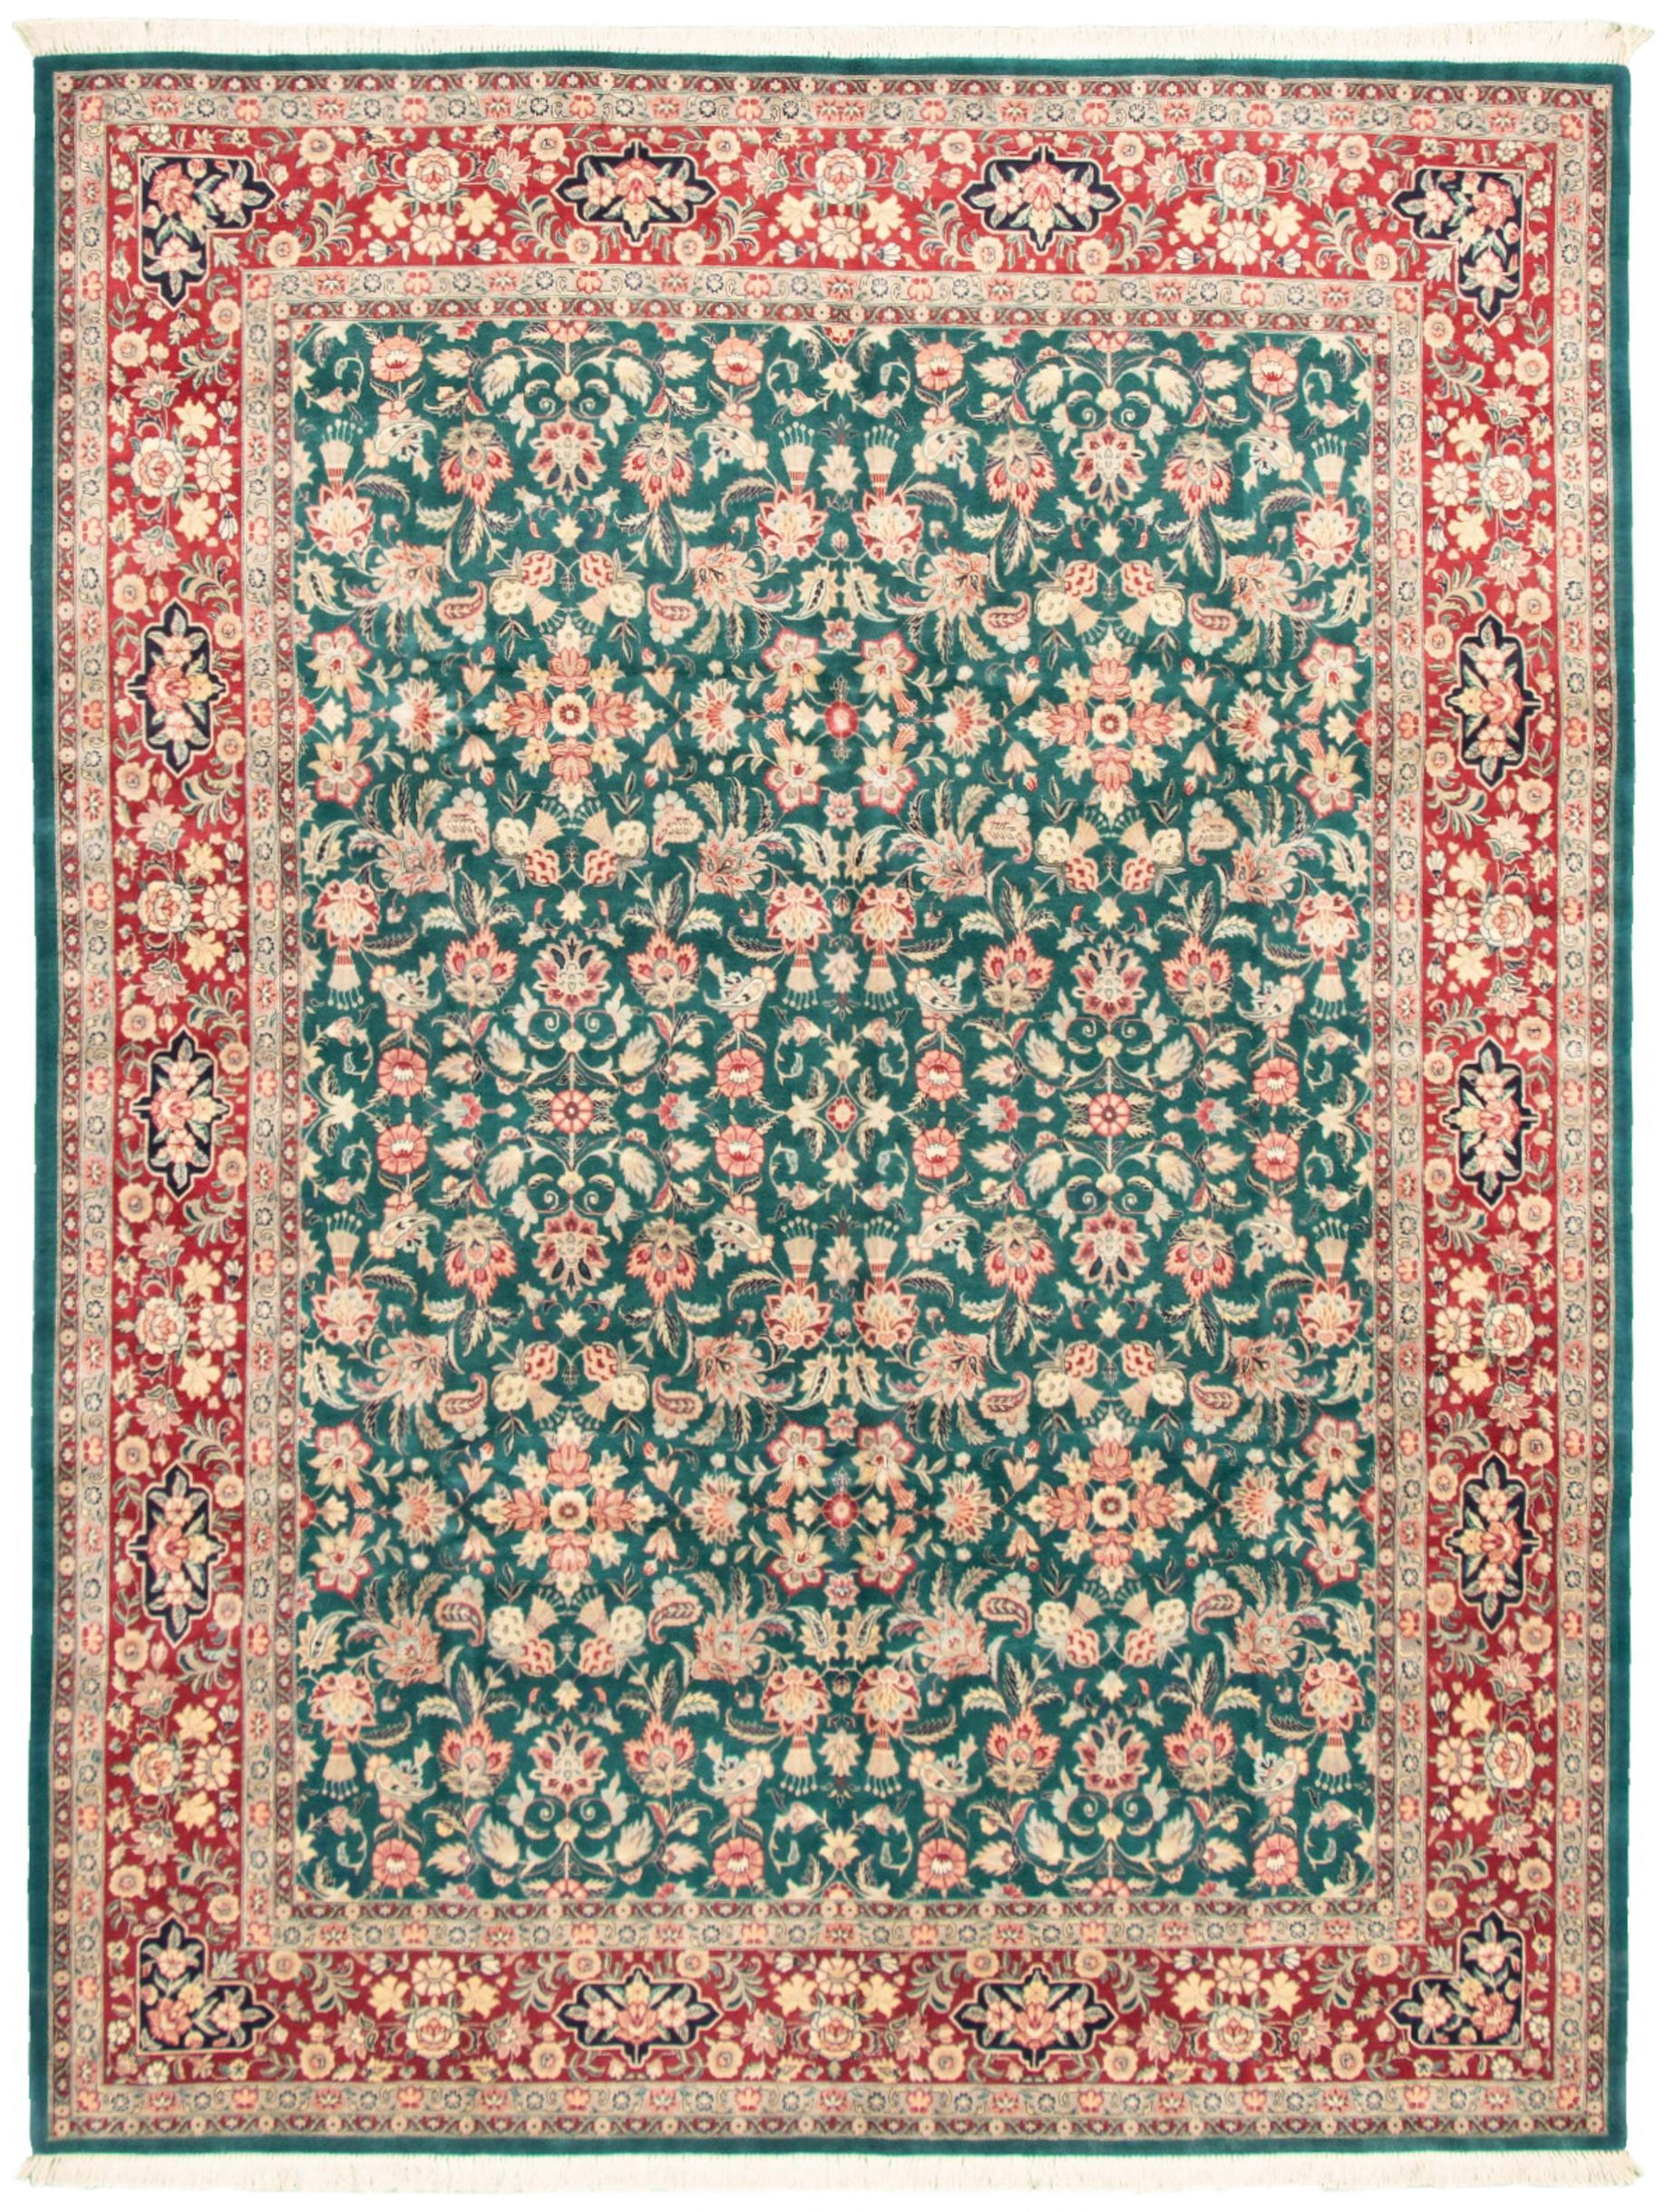 Hand-knotted Pako Persian 18/20 Teal Wool Rug 7'10" x 10'6" Size: 7'10" x 10'6"  